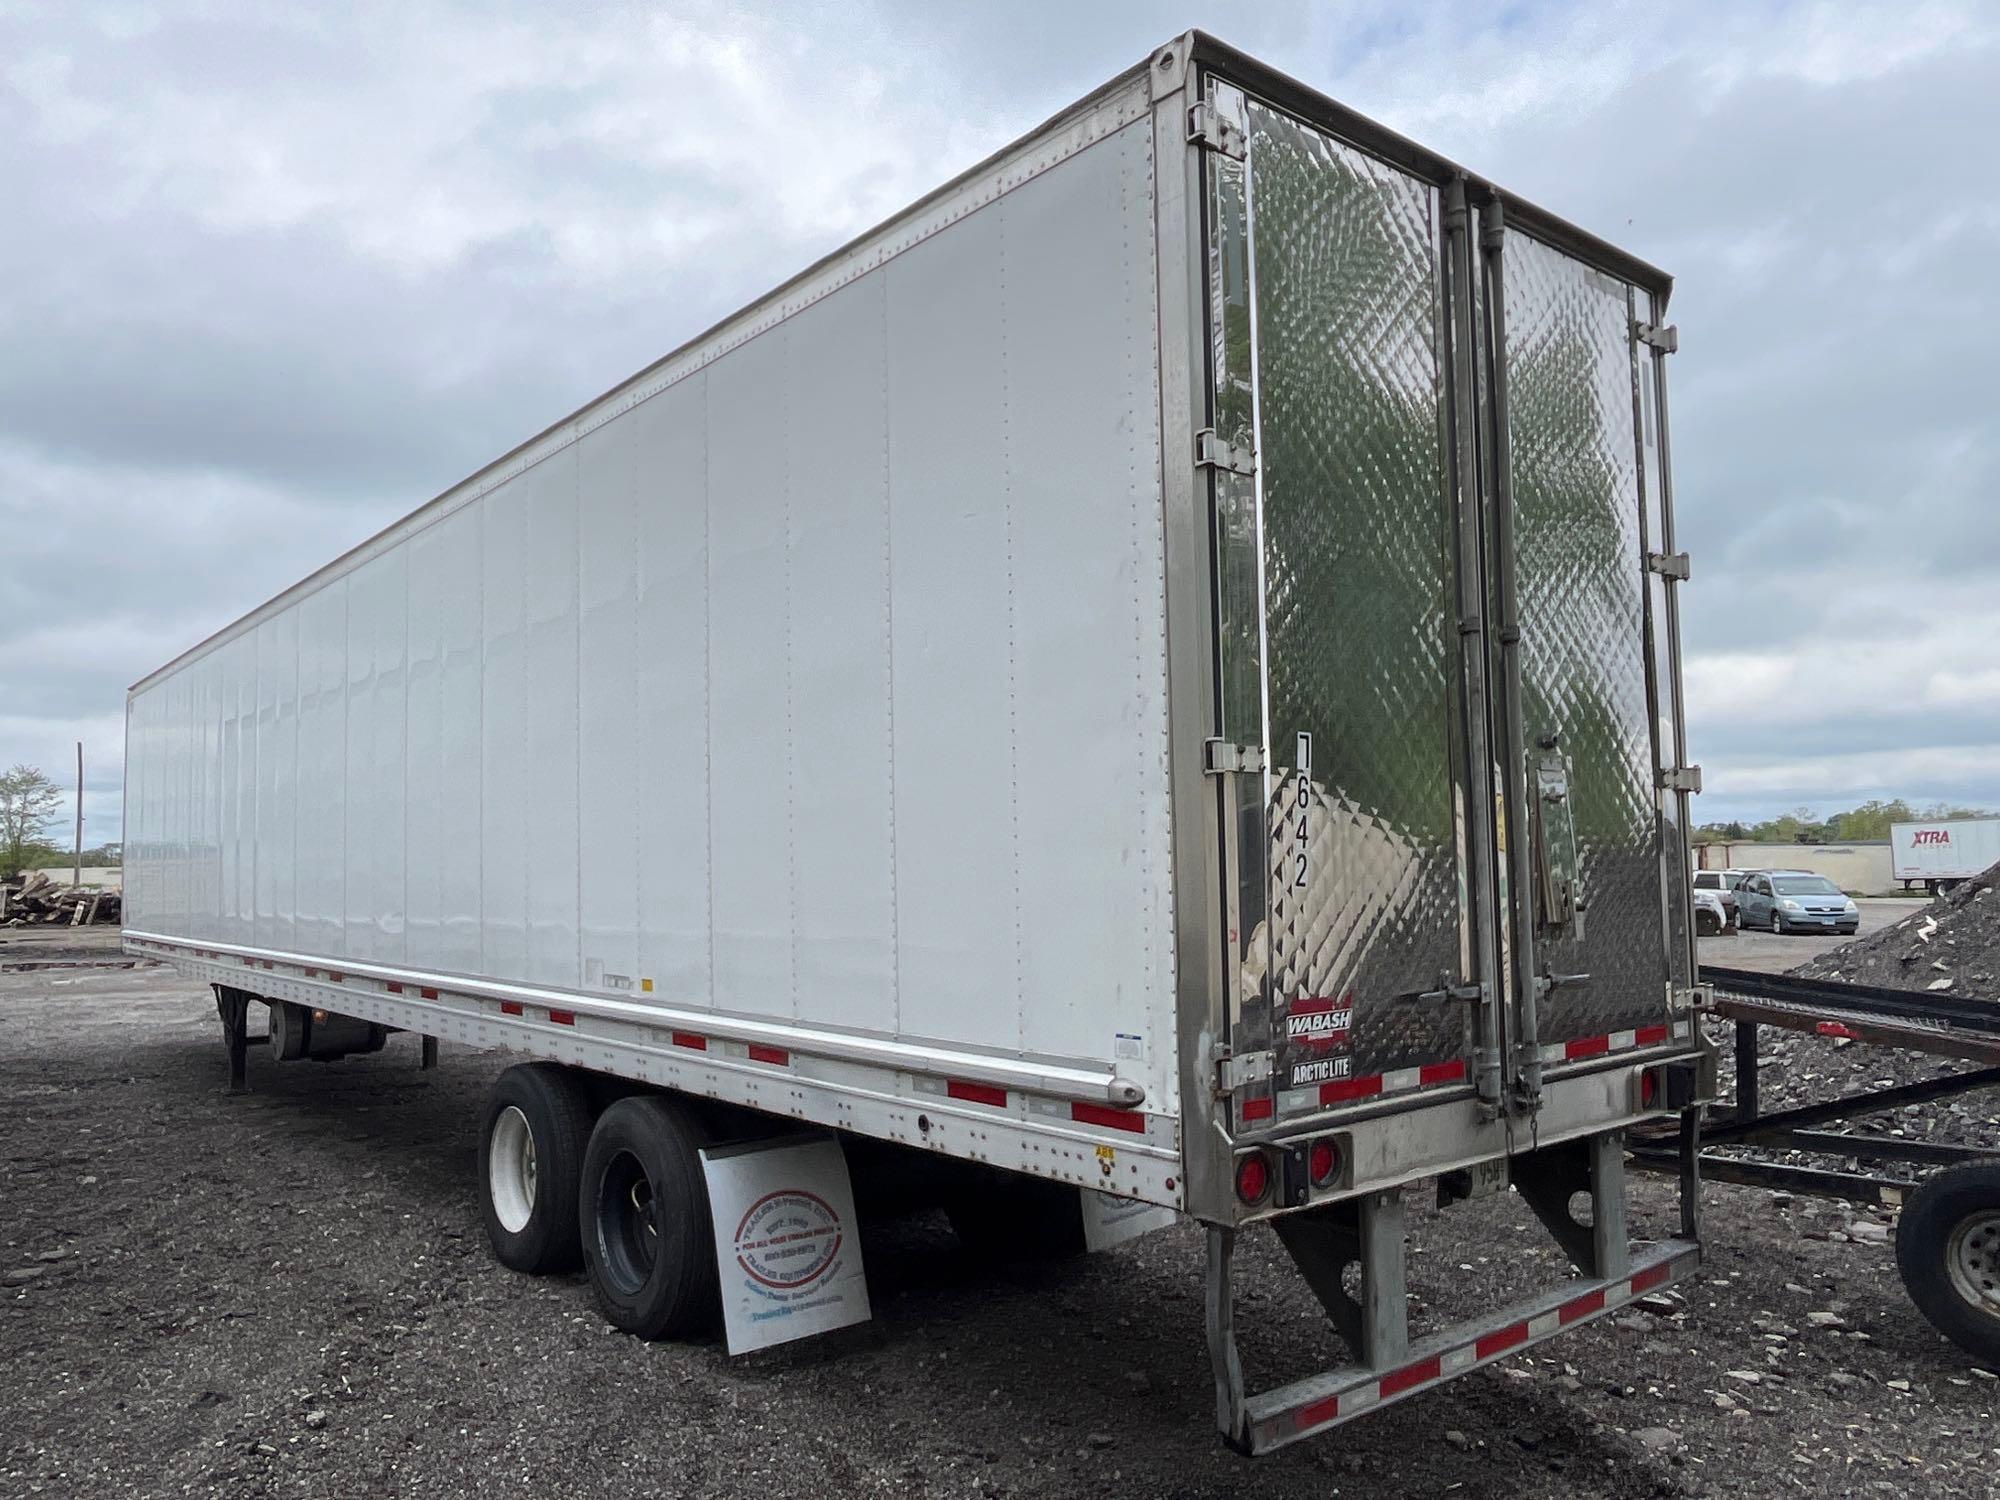 2022 WABASH REEFER TRAILER VN:1JJV532B0NL307642 equipped with 53ft. Reefer body, Thermo King reefer